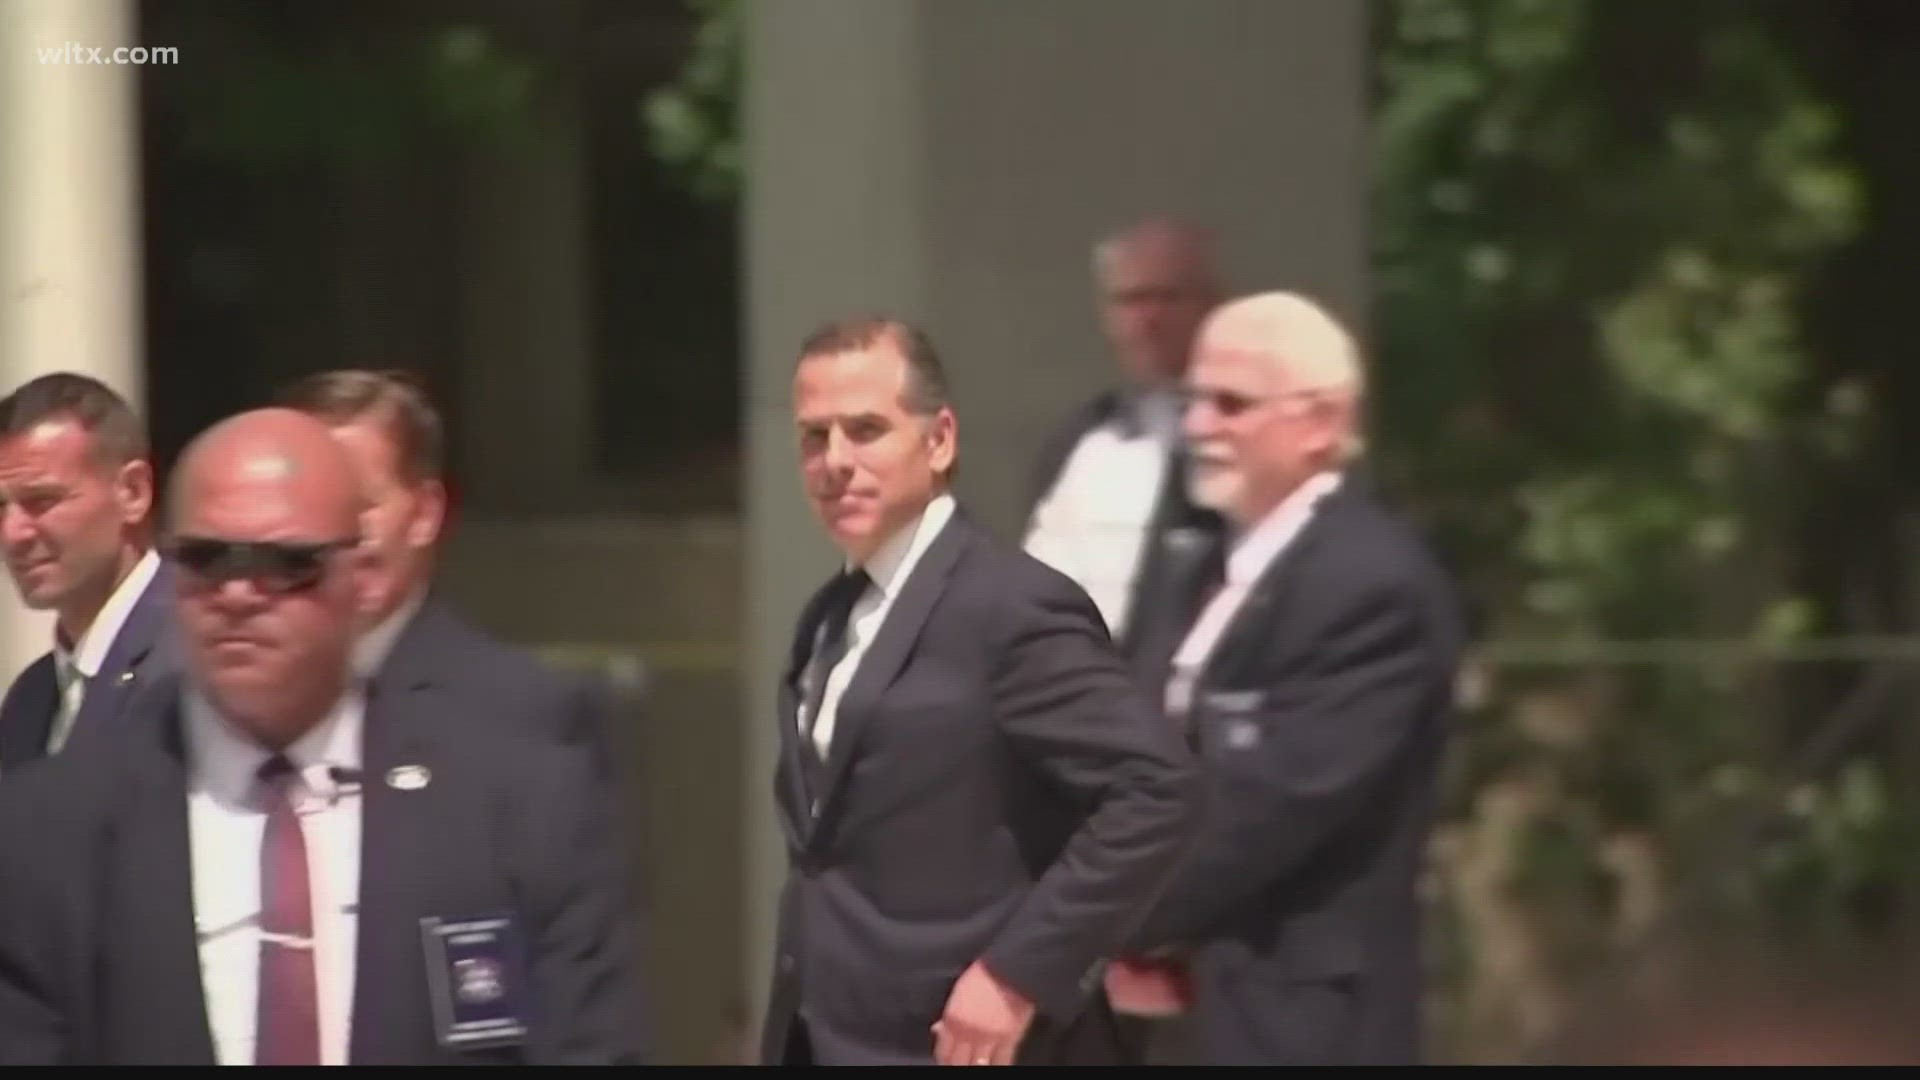 A new indictment against President Joe Biden 's son Hunter could come before the end of September according to documents filed today.